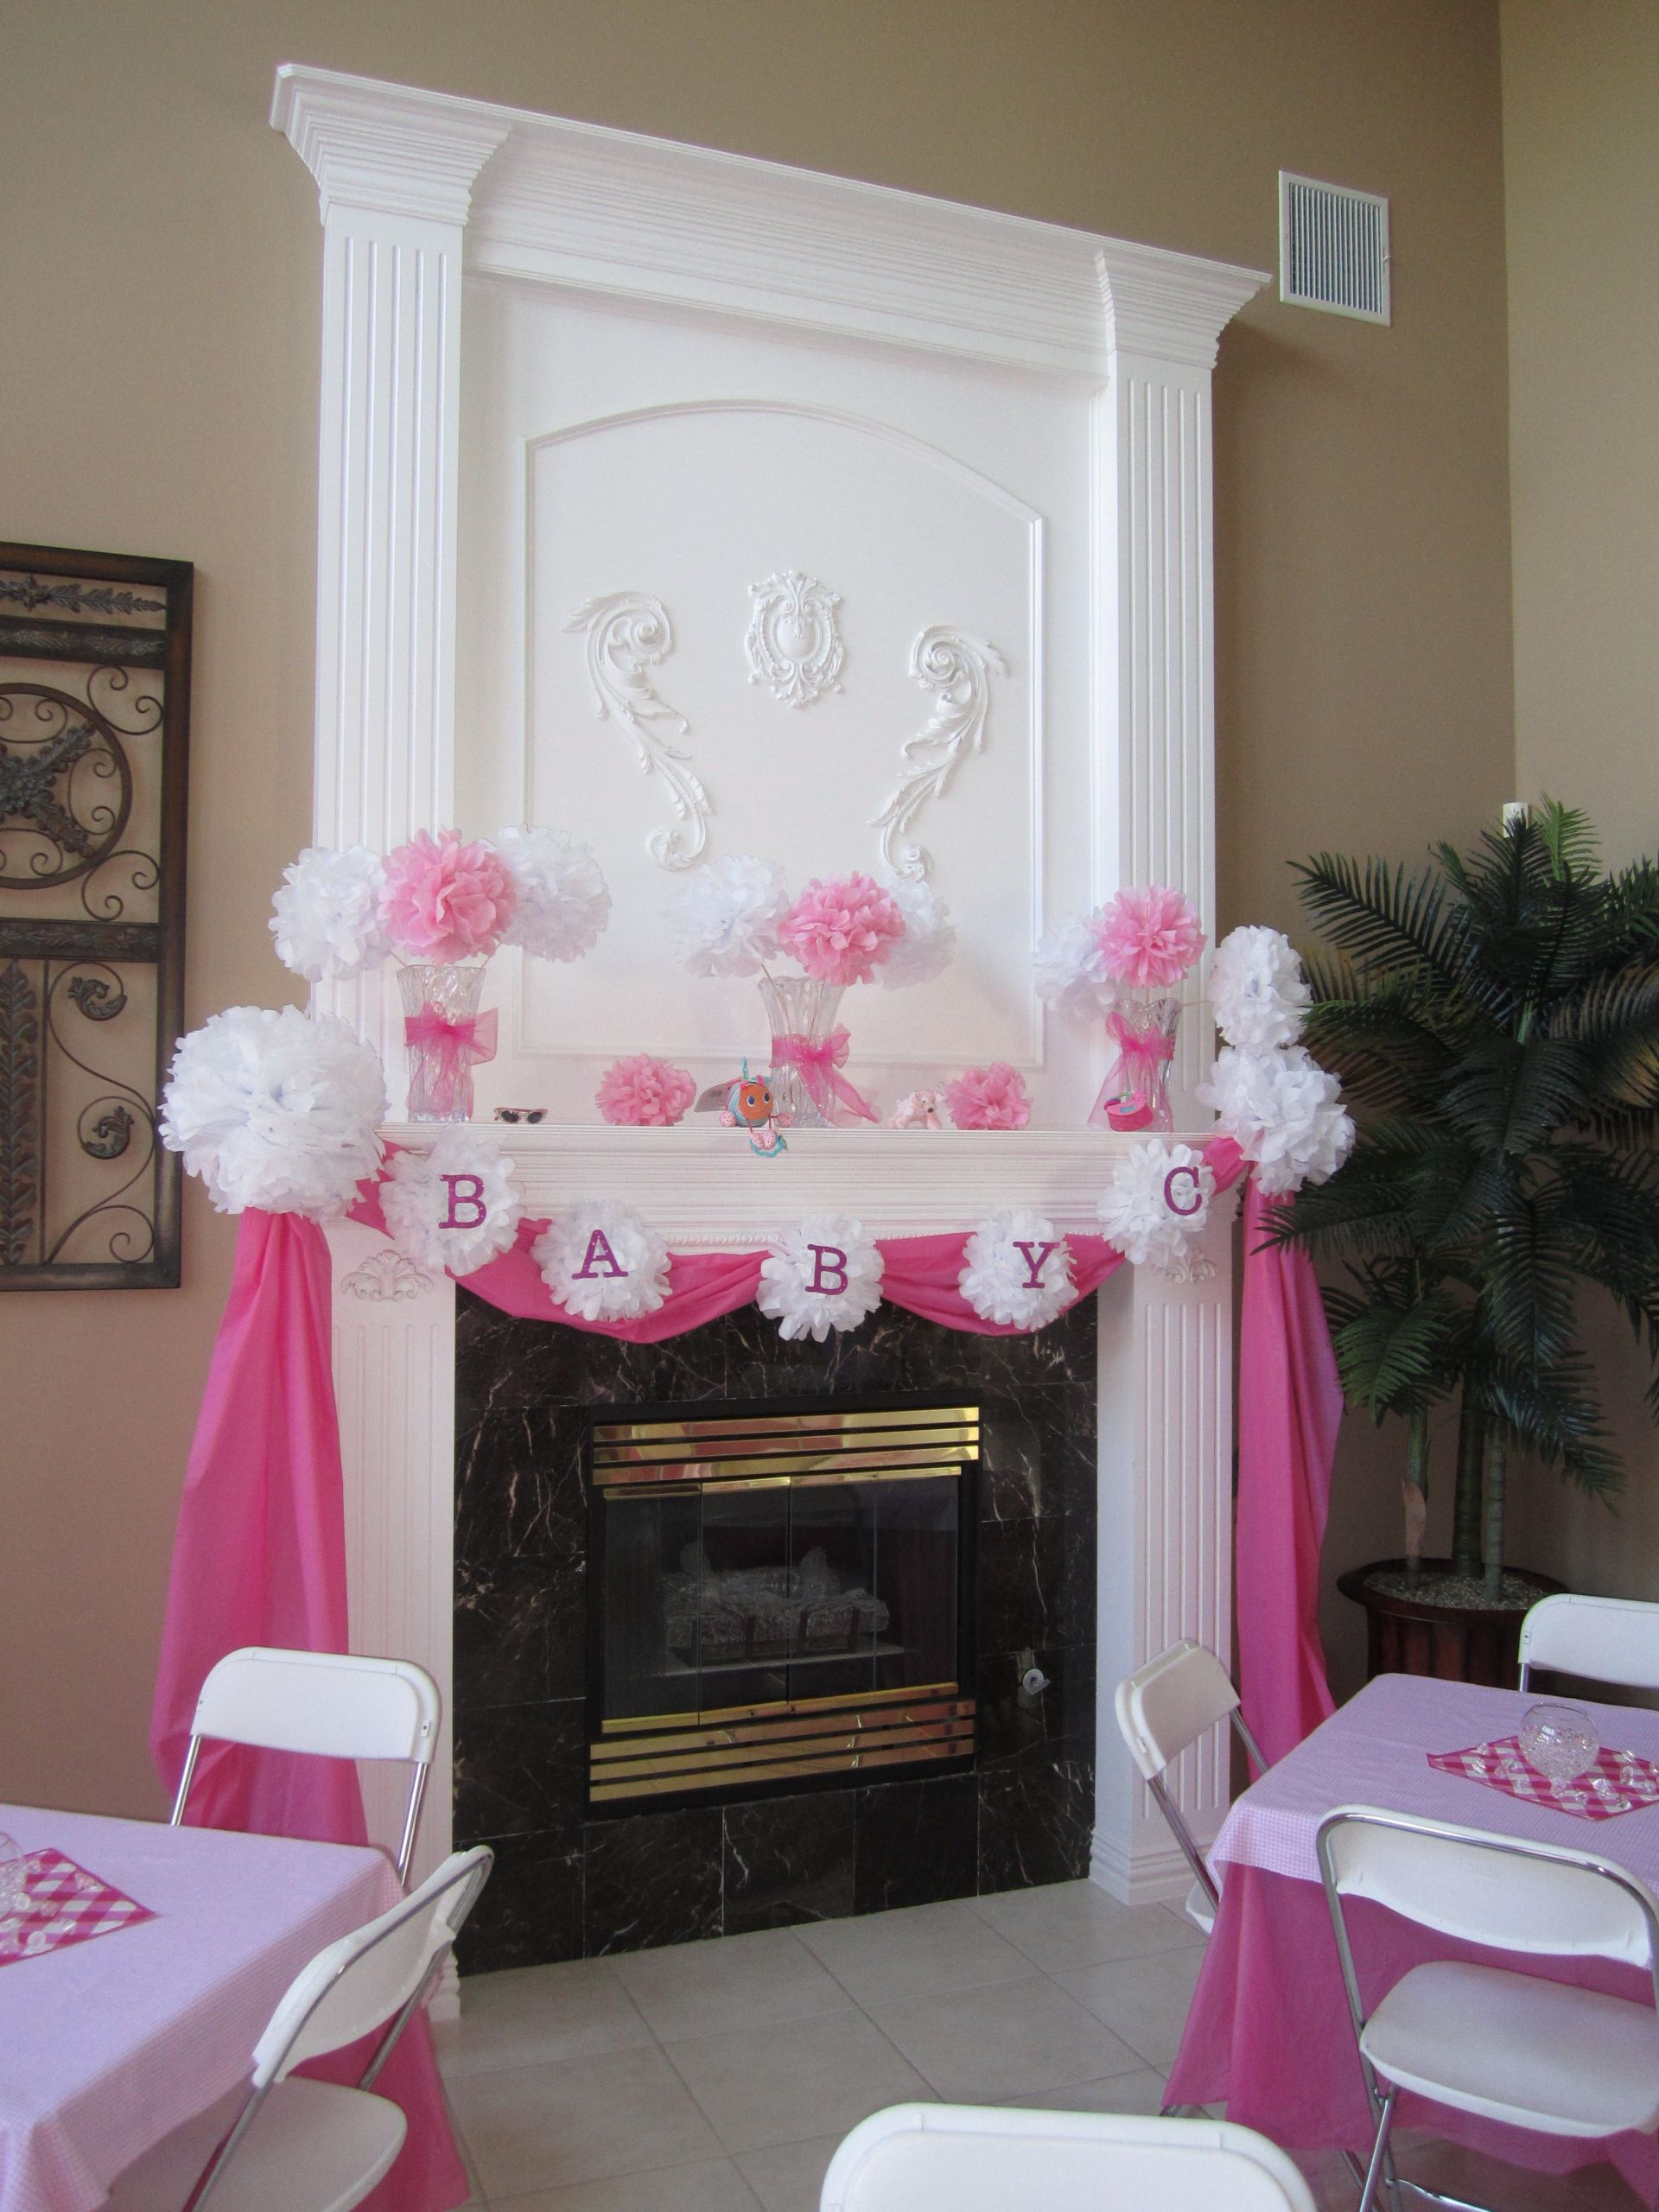 Baby Shower Girl Decoration Ideas
 DIY Baby Shower Ideas for Girls Party Time